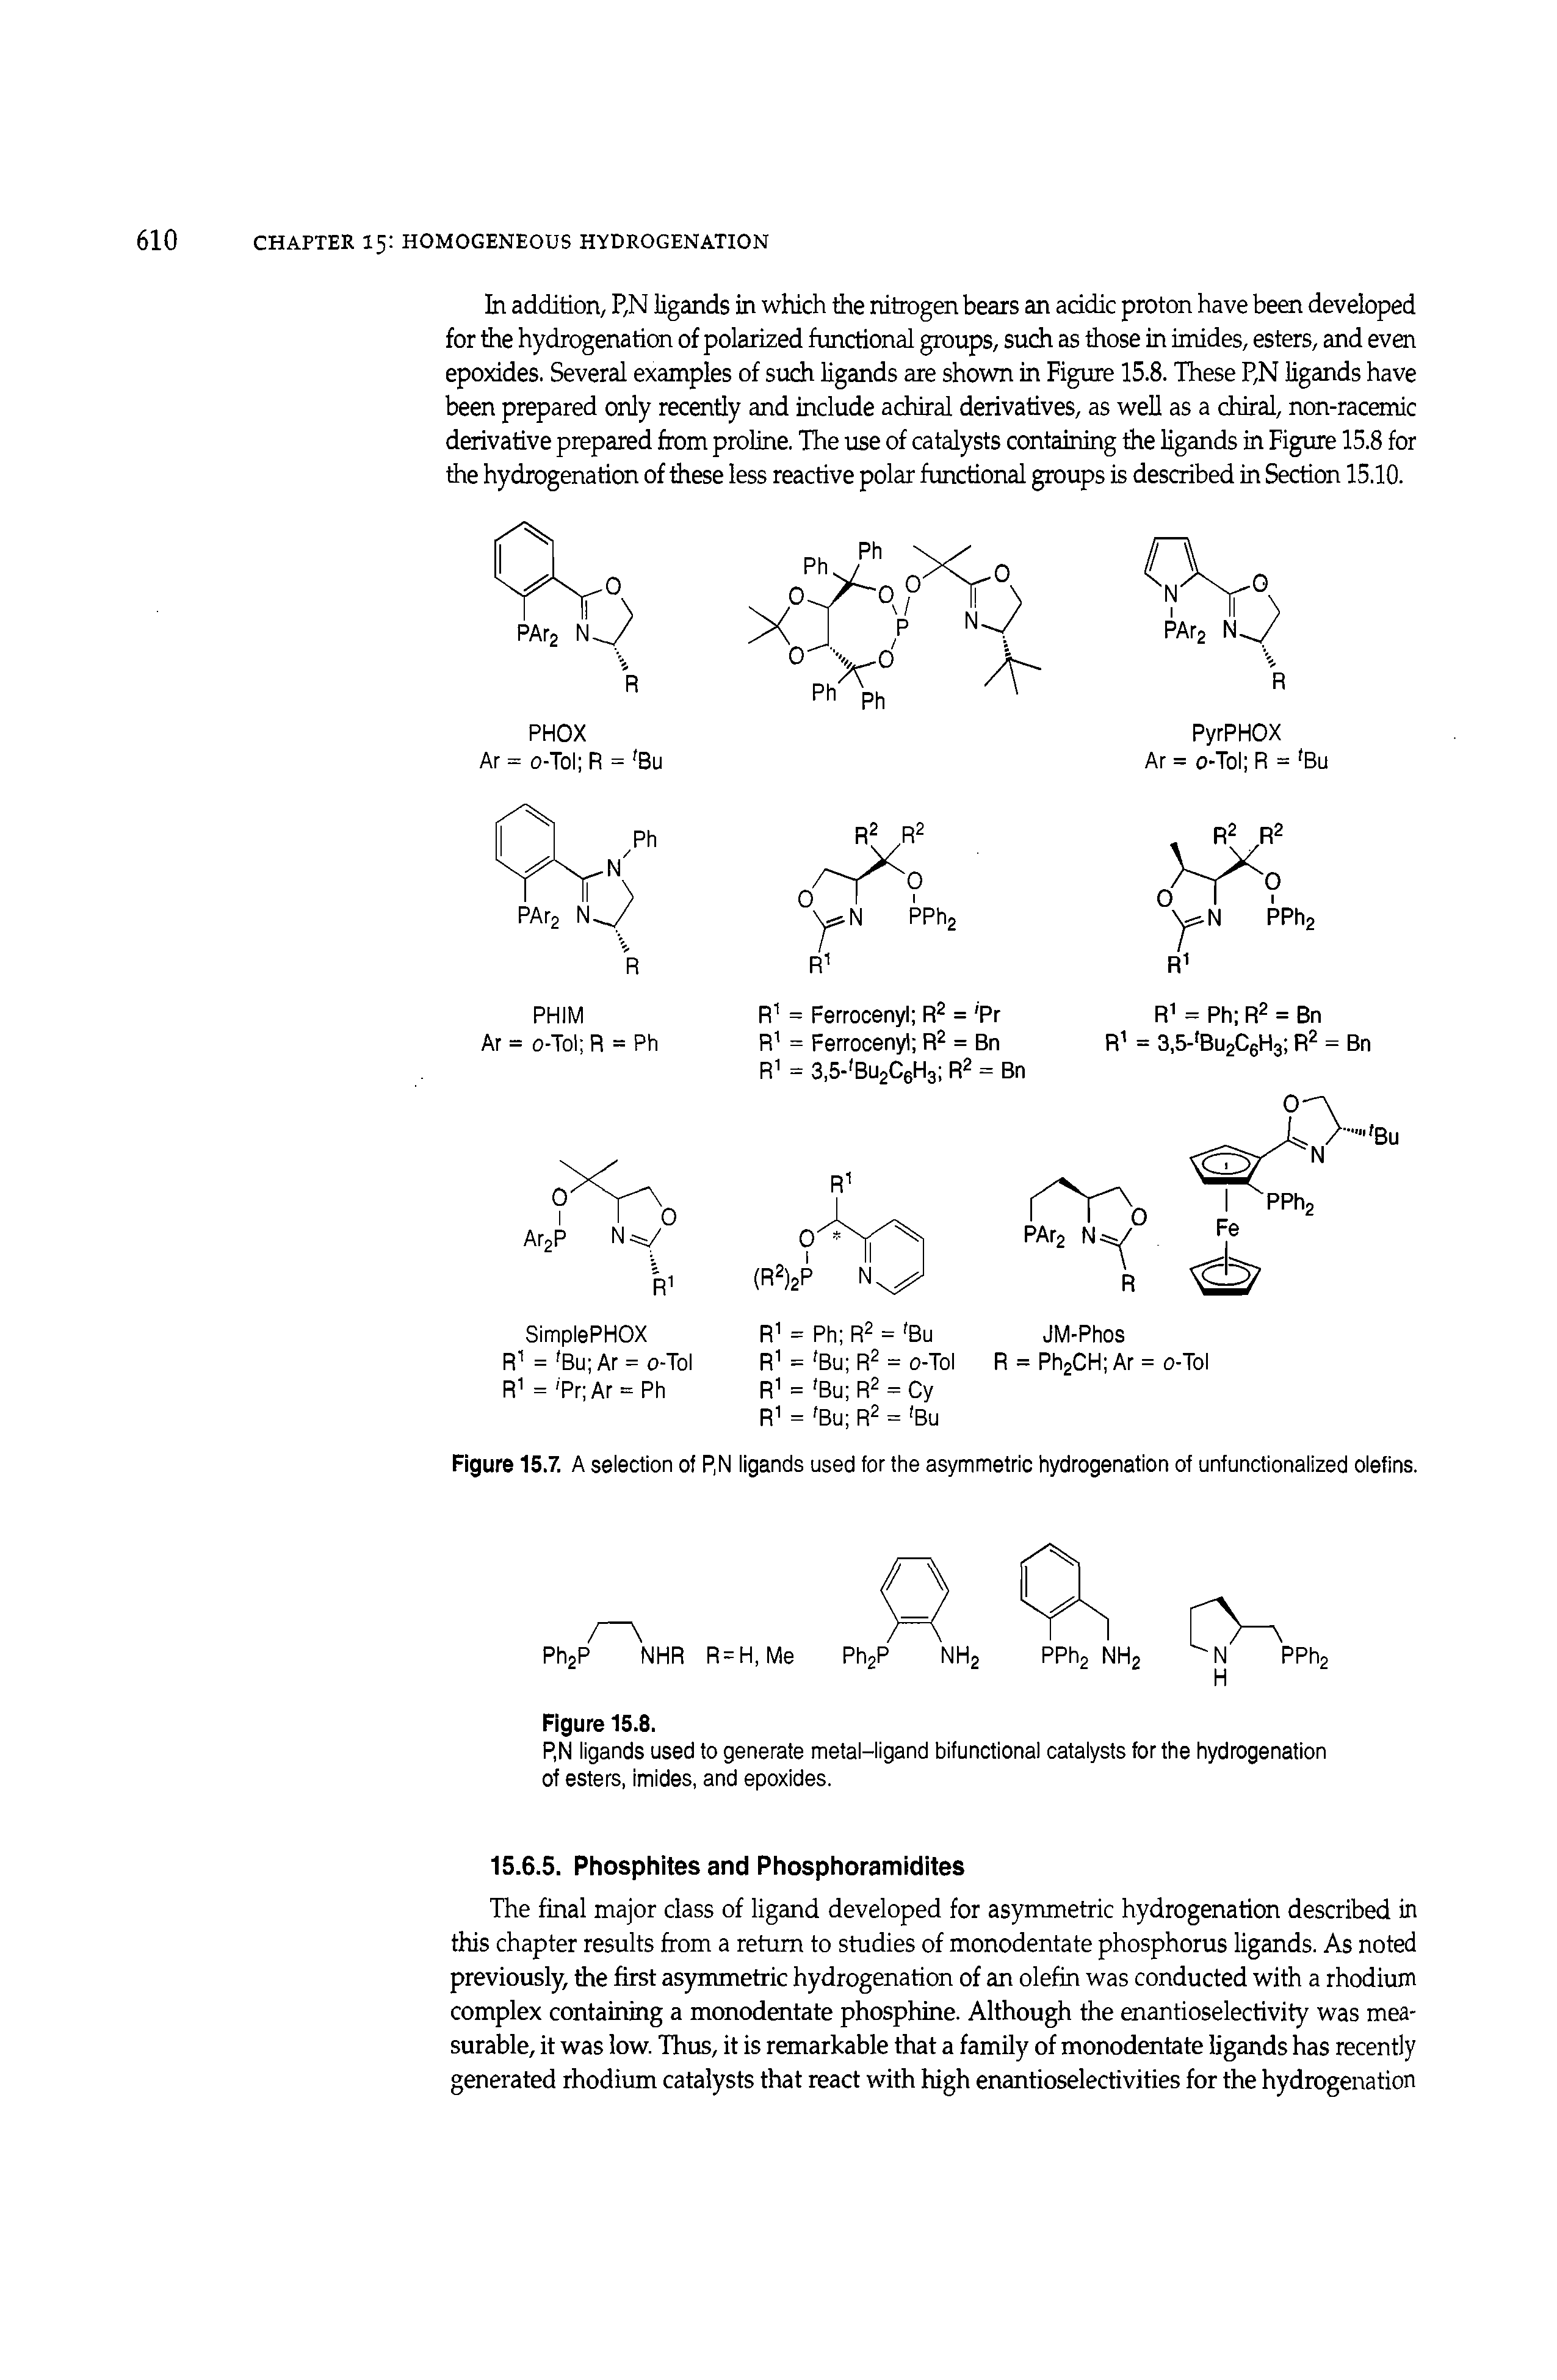 Figure 15.7. A selection of P,N ligands used for the asymmetric hydrogenation of unfunctionalized olefins.